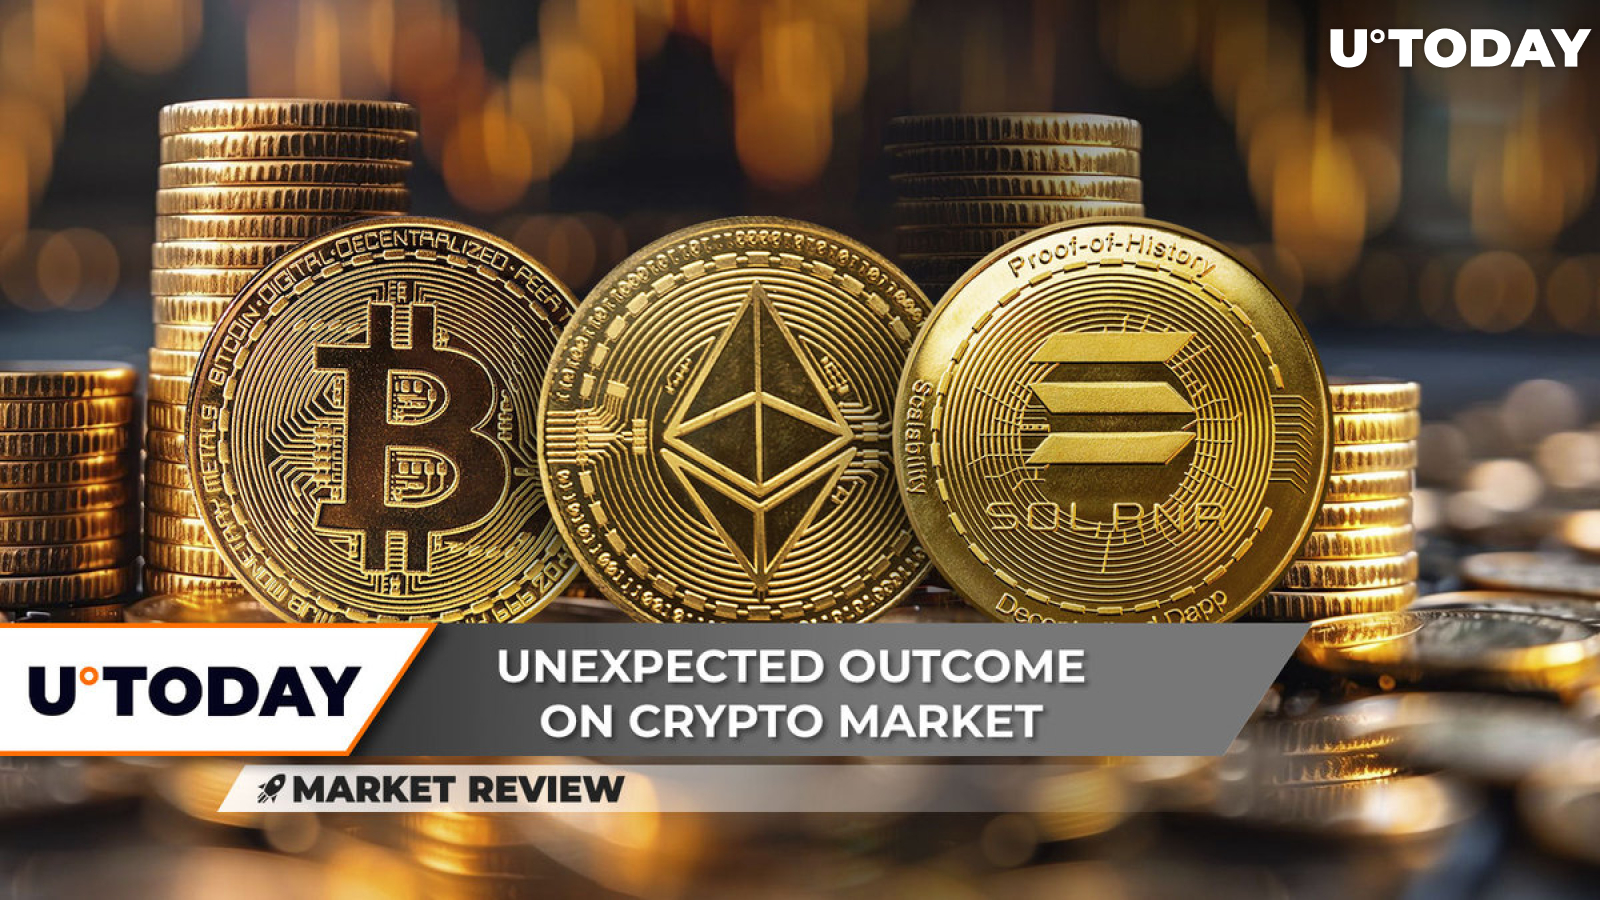 Bitcoin (BTC) Drops Below $60,000, Ethereum (ETH) Says Goodbye to $3,000, Solana (SOL) Strength Disappears: Is Bull Market Over?